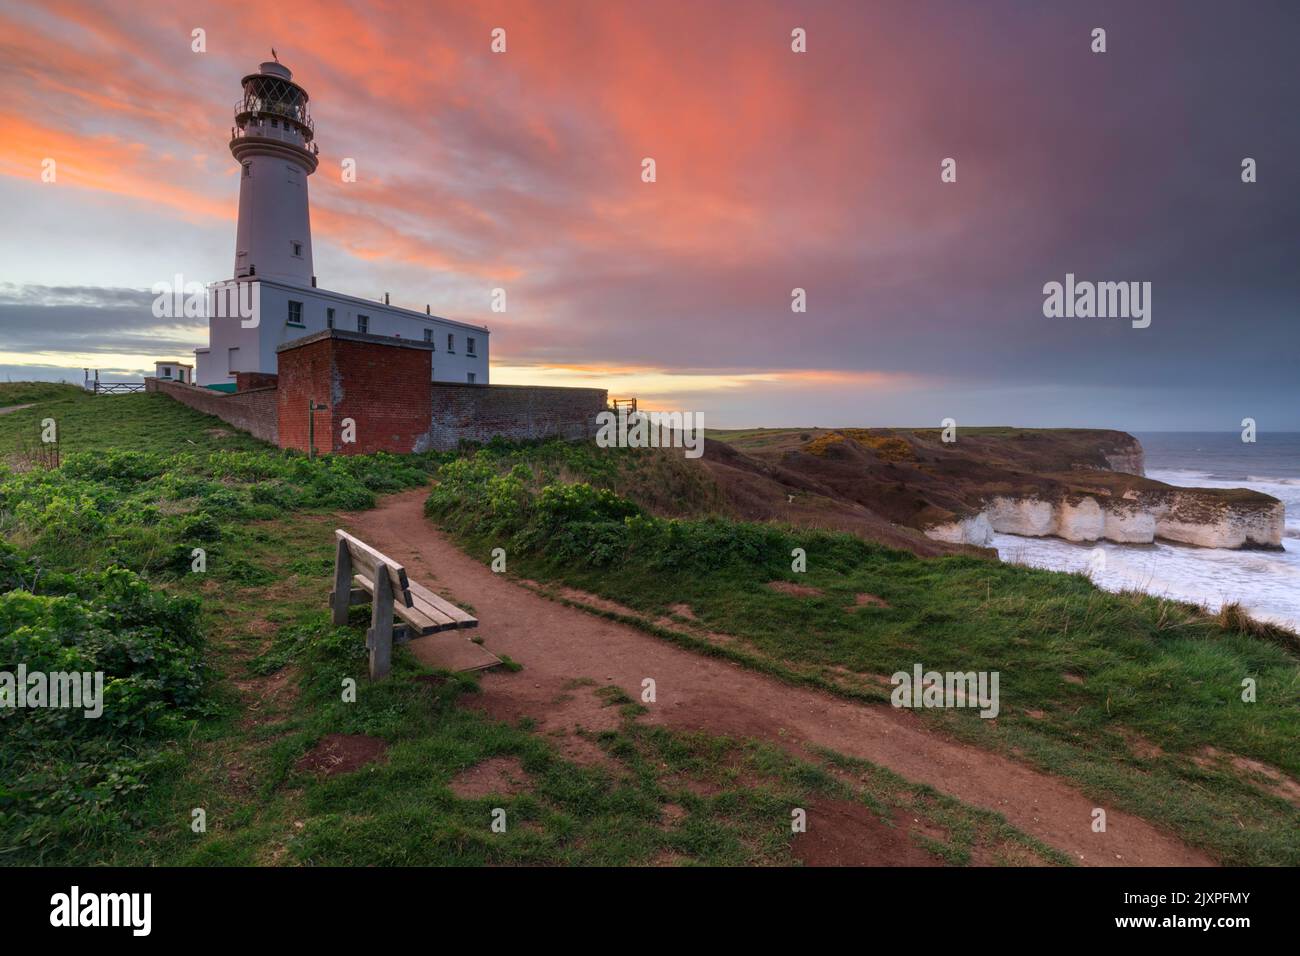 Flamborough Head Lighthouse in Yorkshire captured at sunset. Stock Photo